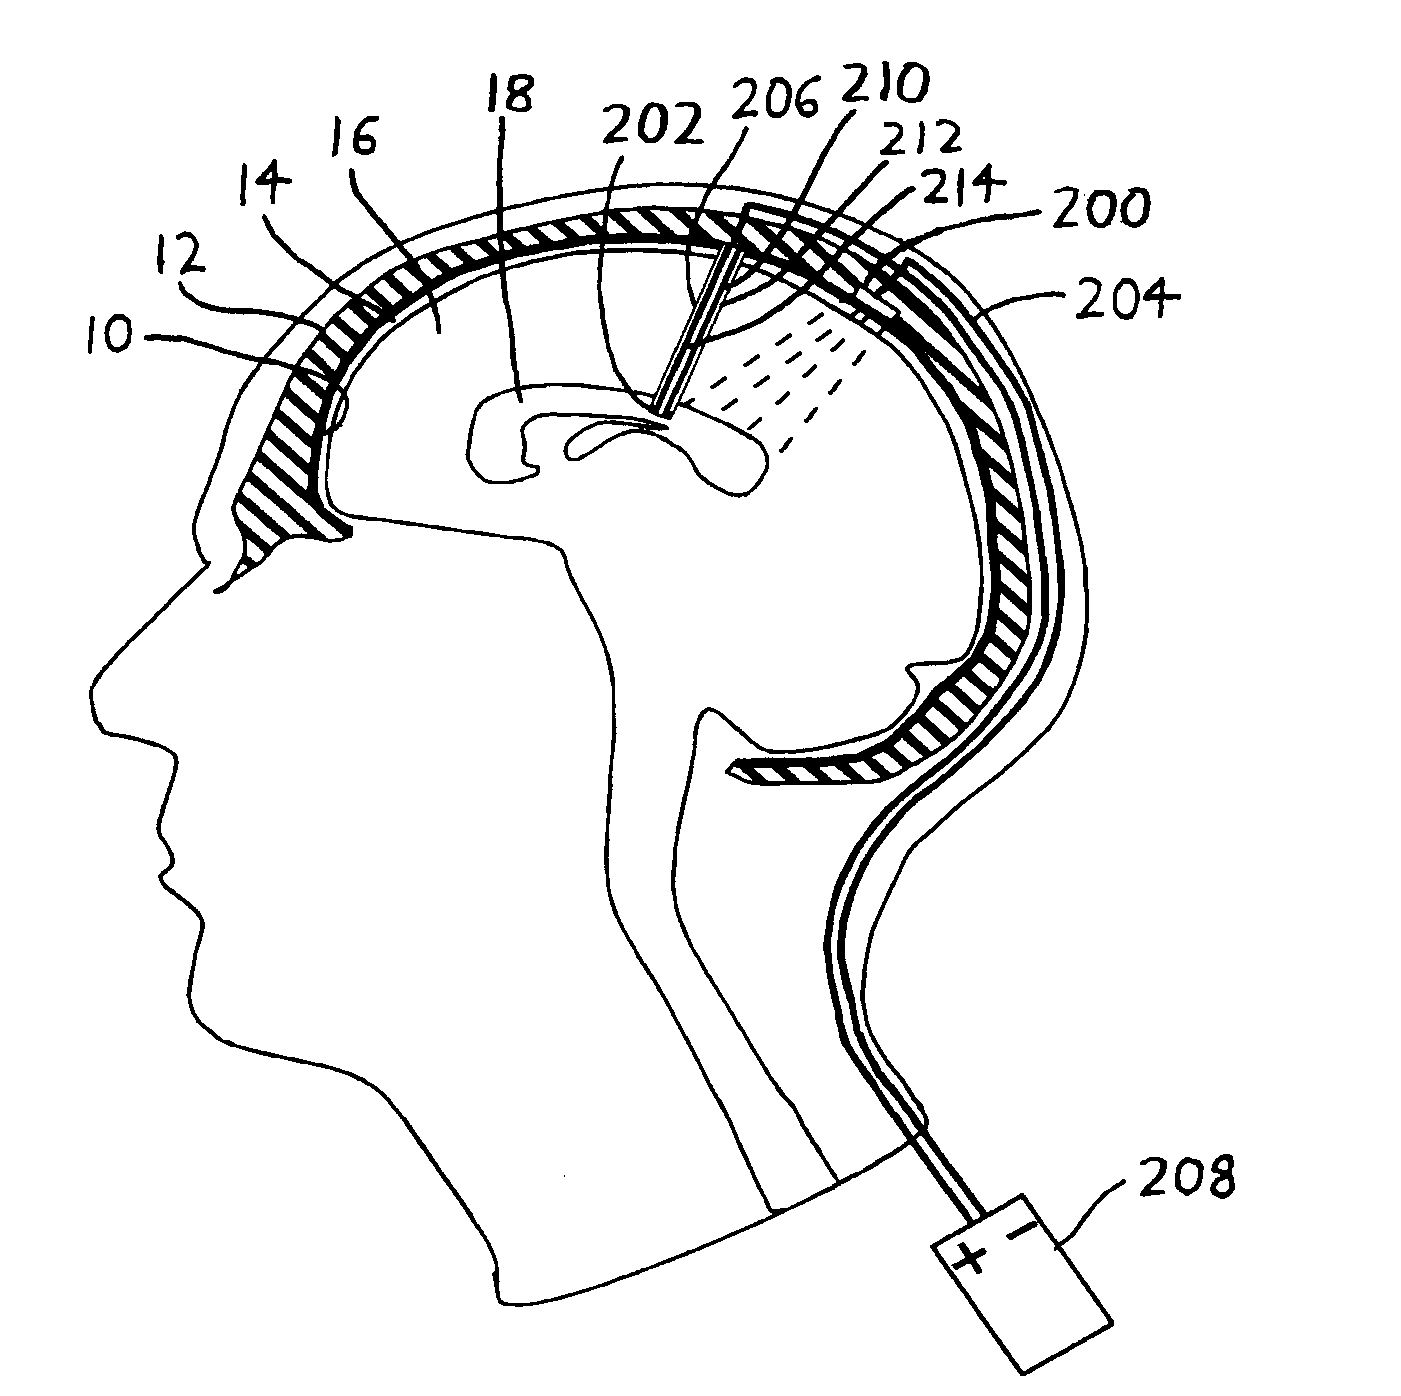 Intraventricular electrodes for electrical stimulation of the brain